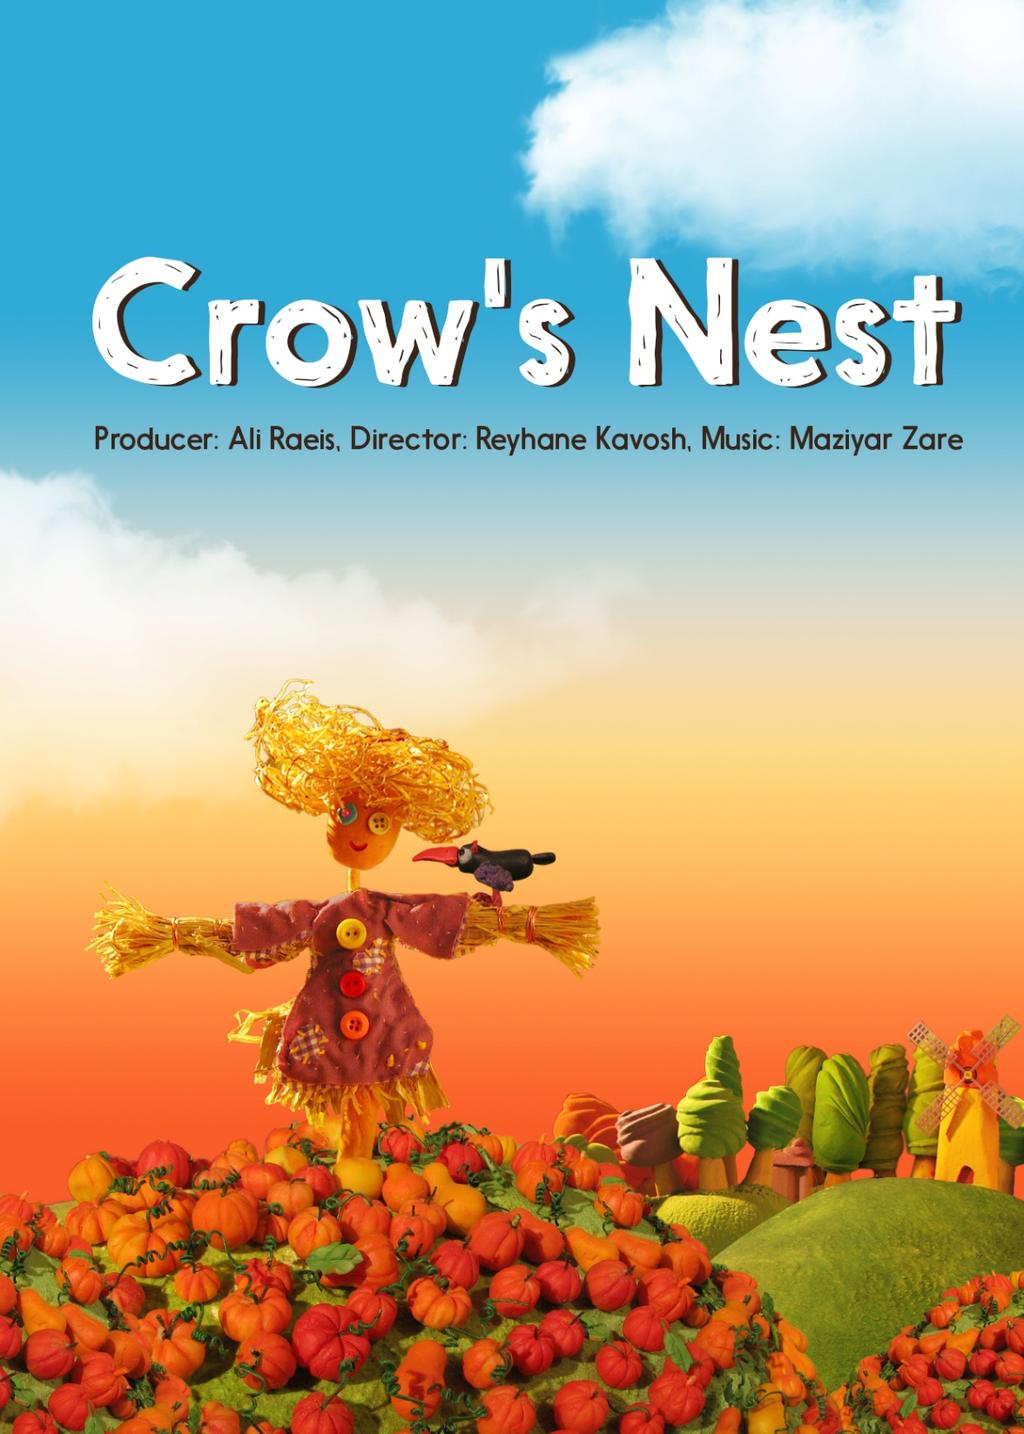 12. Crow s Nest Synopsis: a crow who loves pumpkin, decided to build his nest on scarecrow's head.